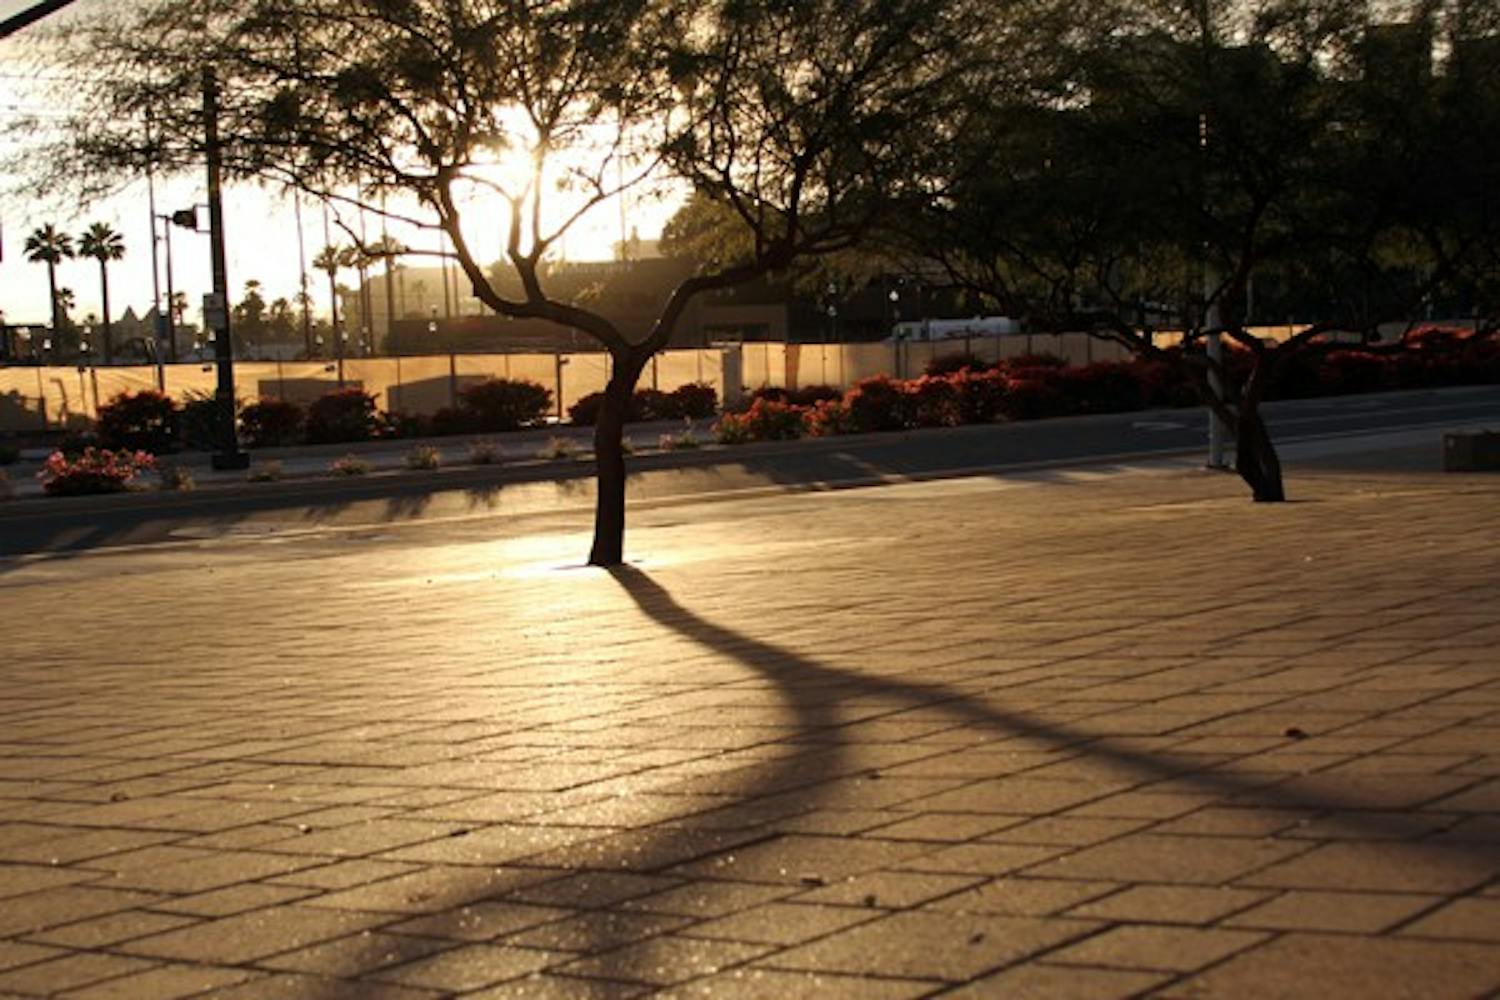 A backlit tree casts a shadow in front of Sun Devil Stadium in Tempe Thursday evening. (Photo by Lisa Bartoli)